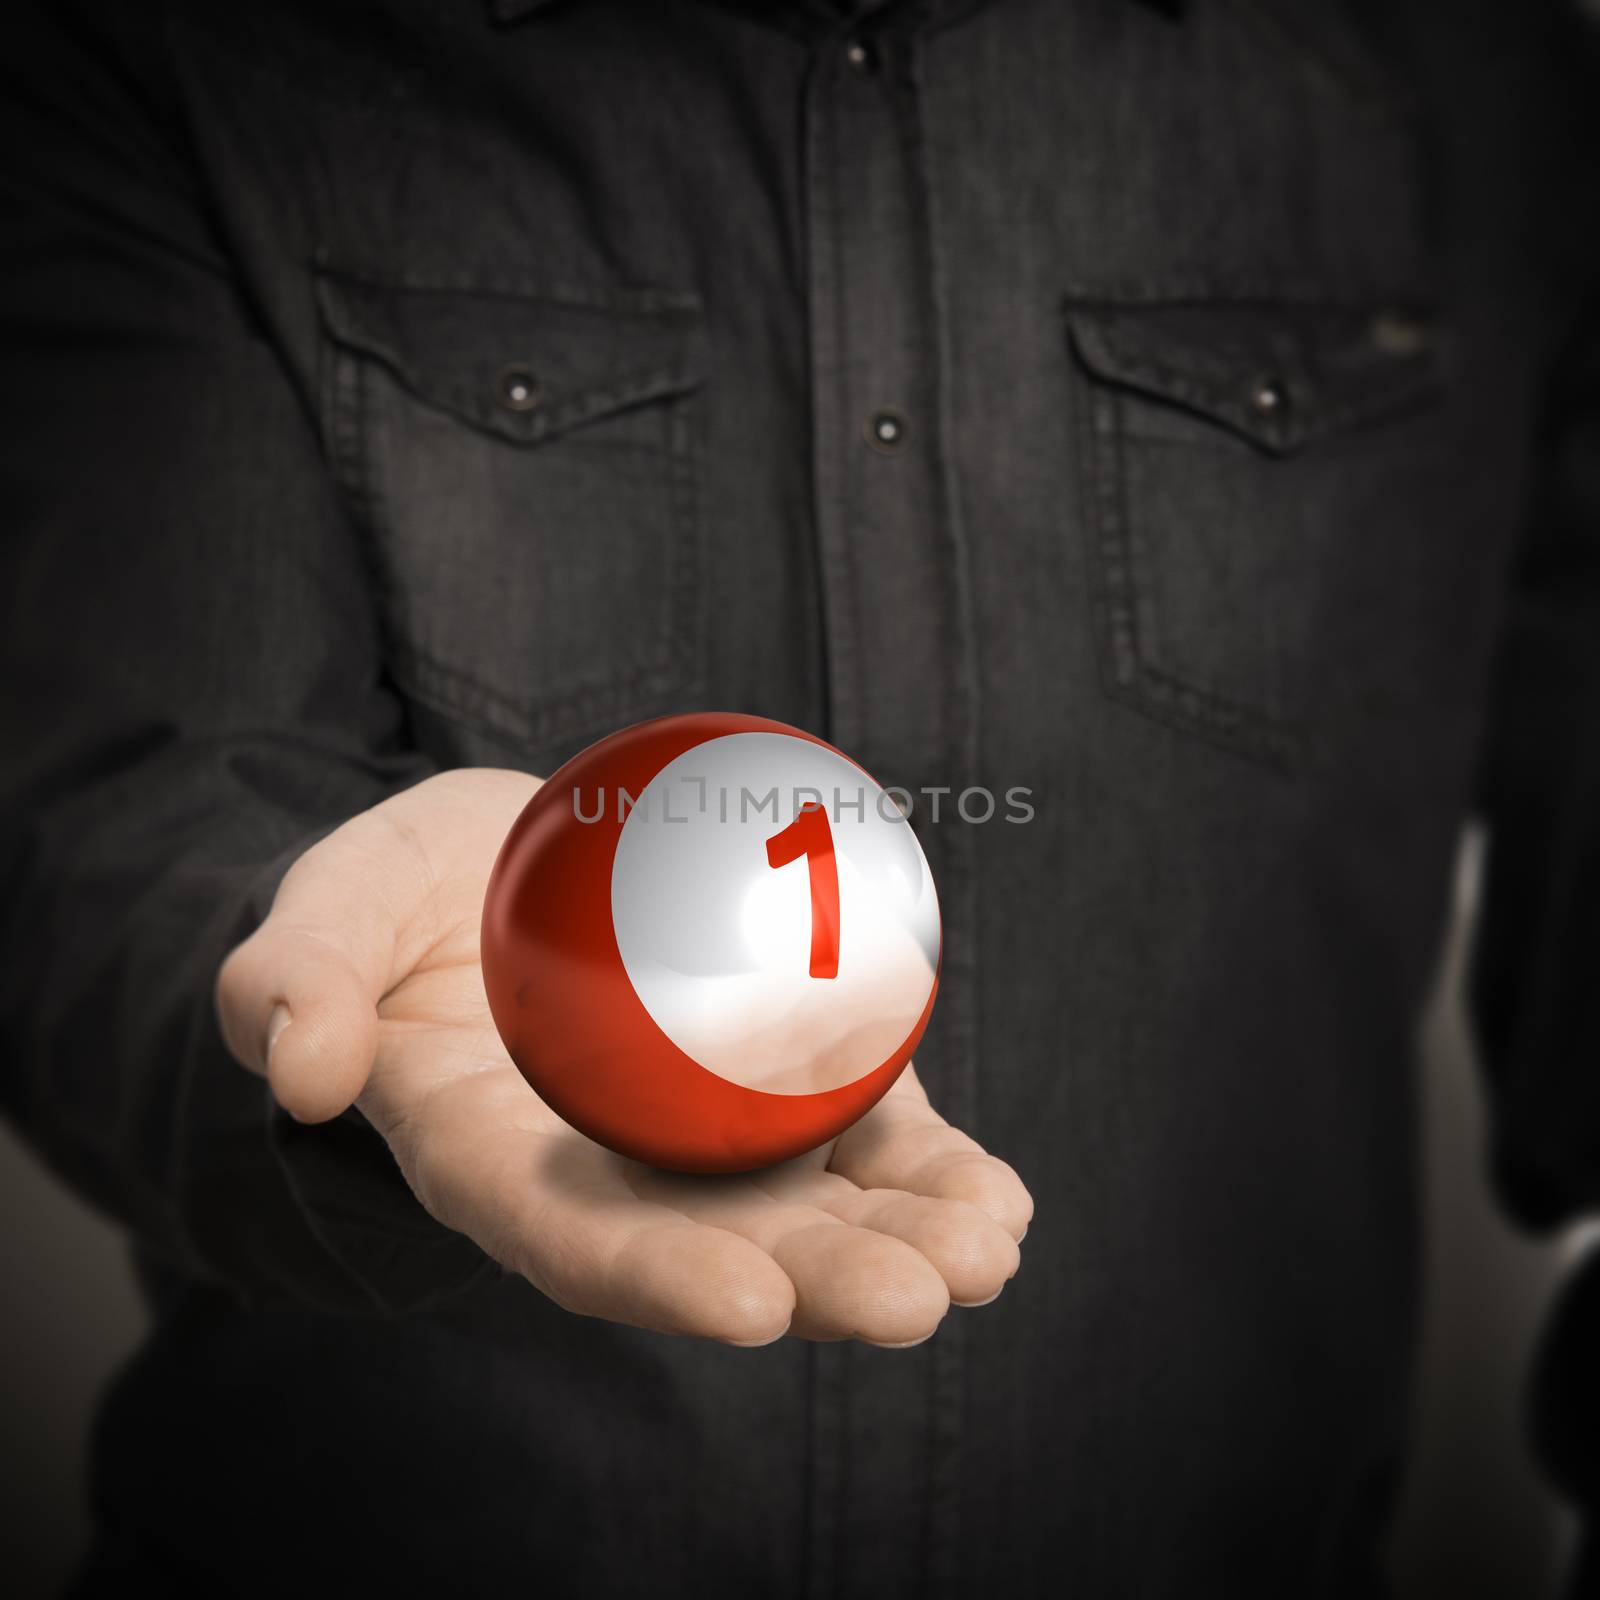 Man hand holding red ball with number one over blackbackground, concept image for illustration of leader.